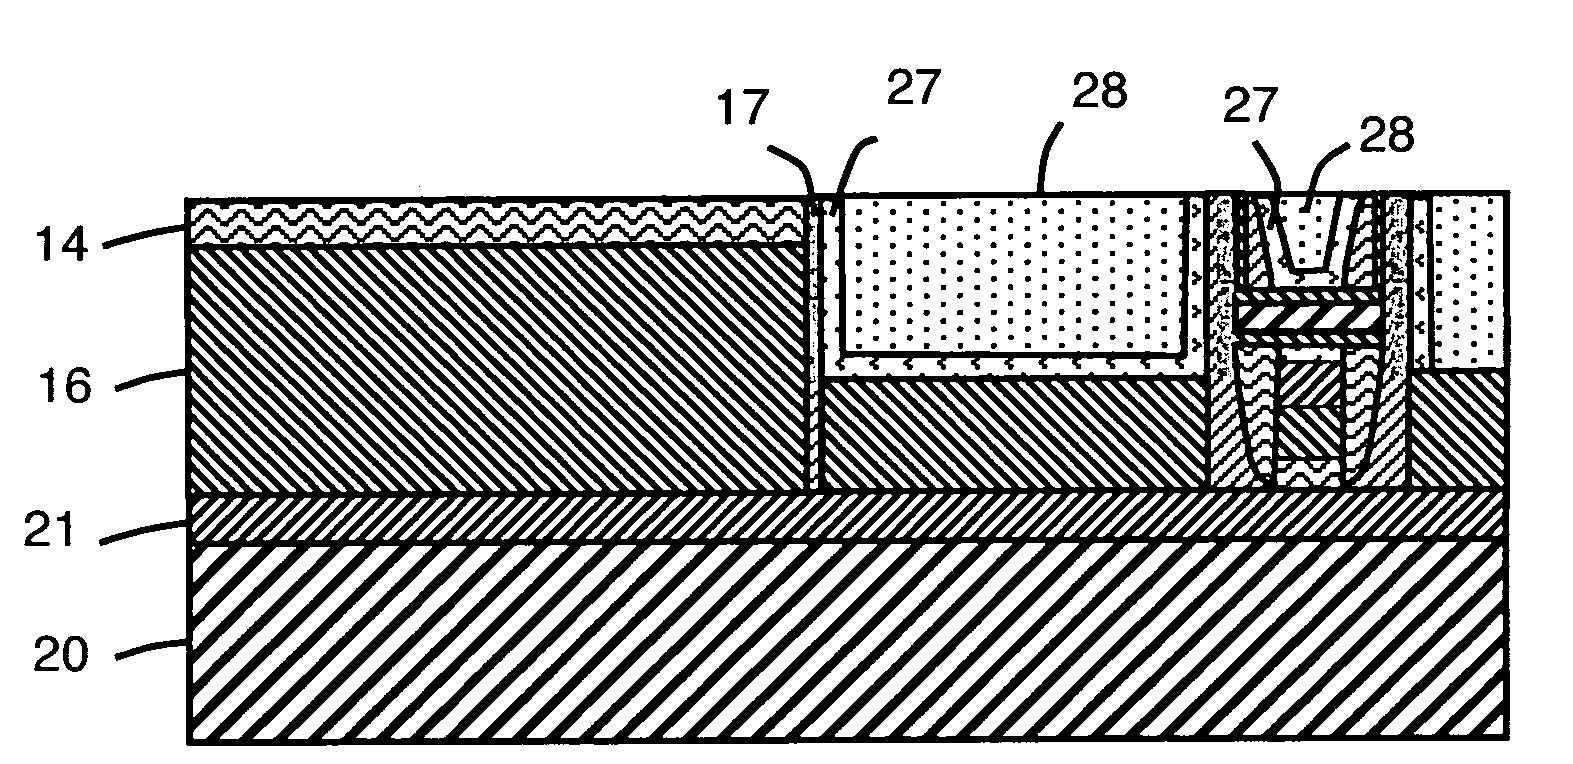 Process for Fabricating a Field-Effect Transistor with Self-Aligned Gates